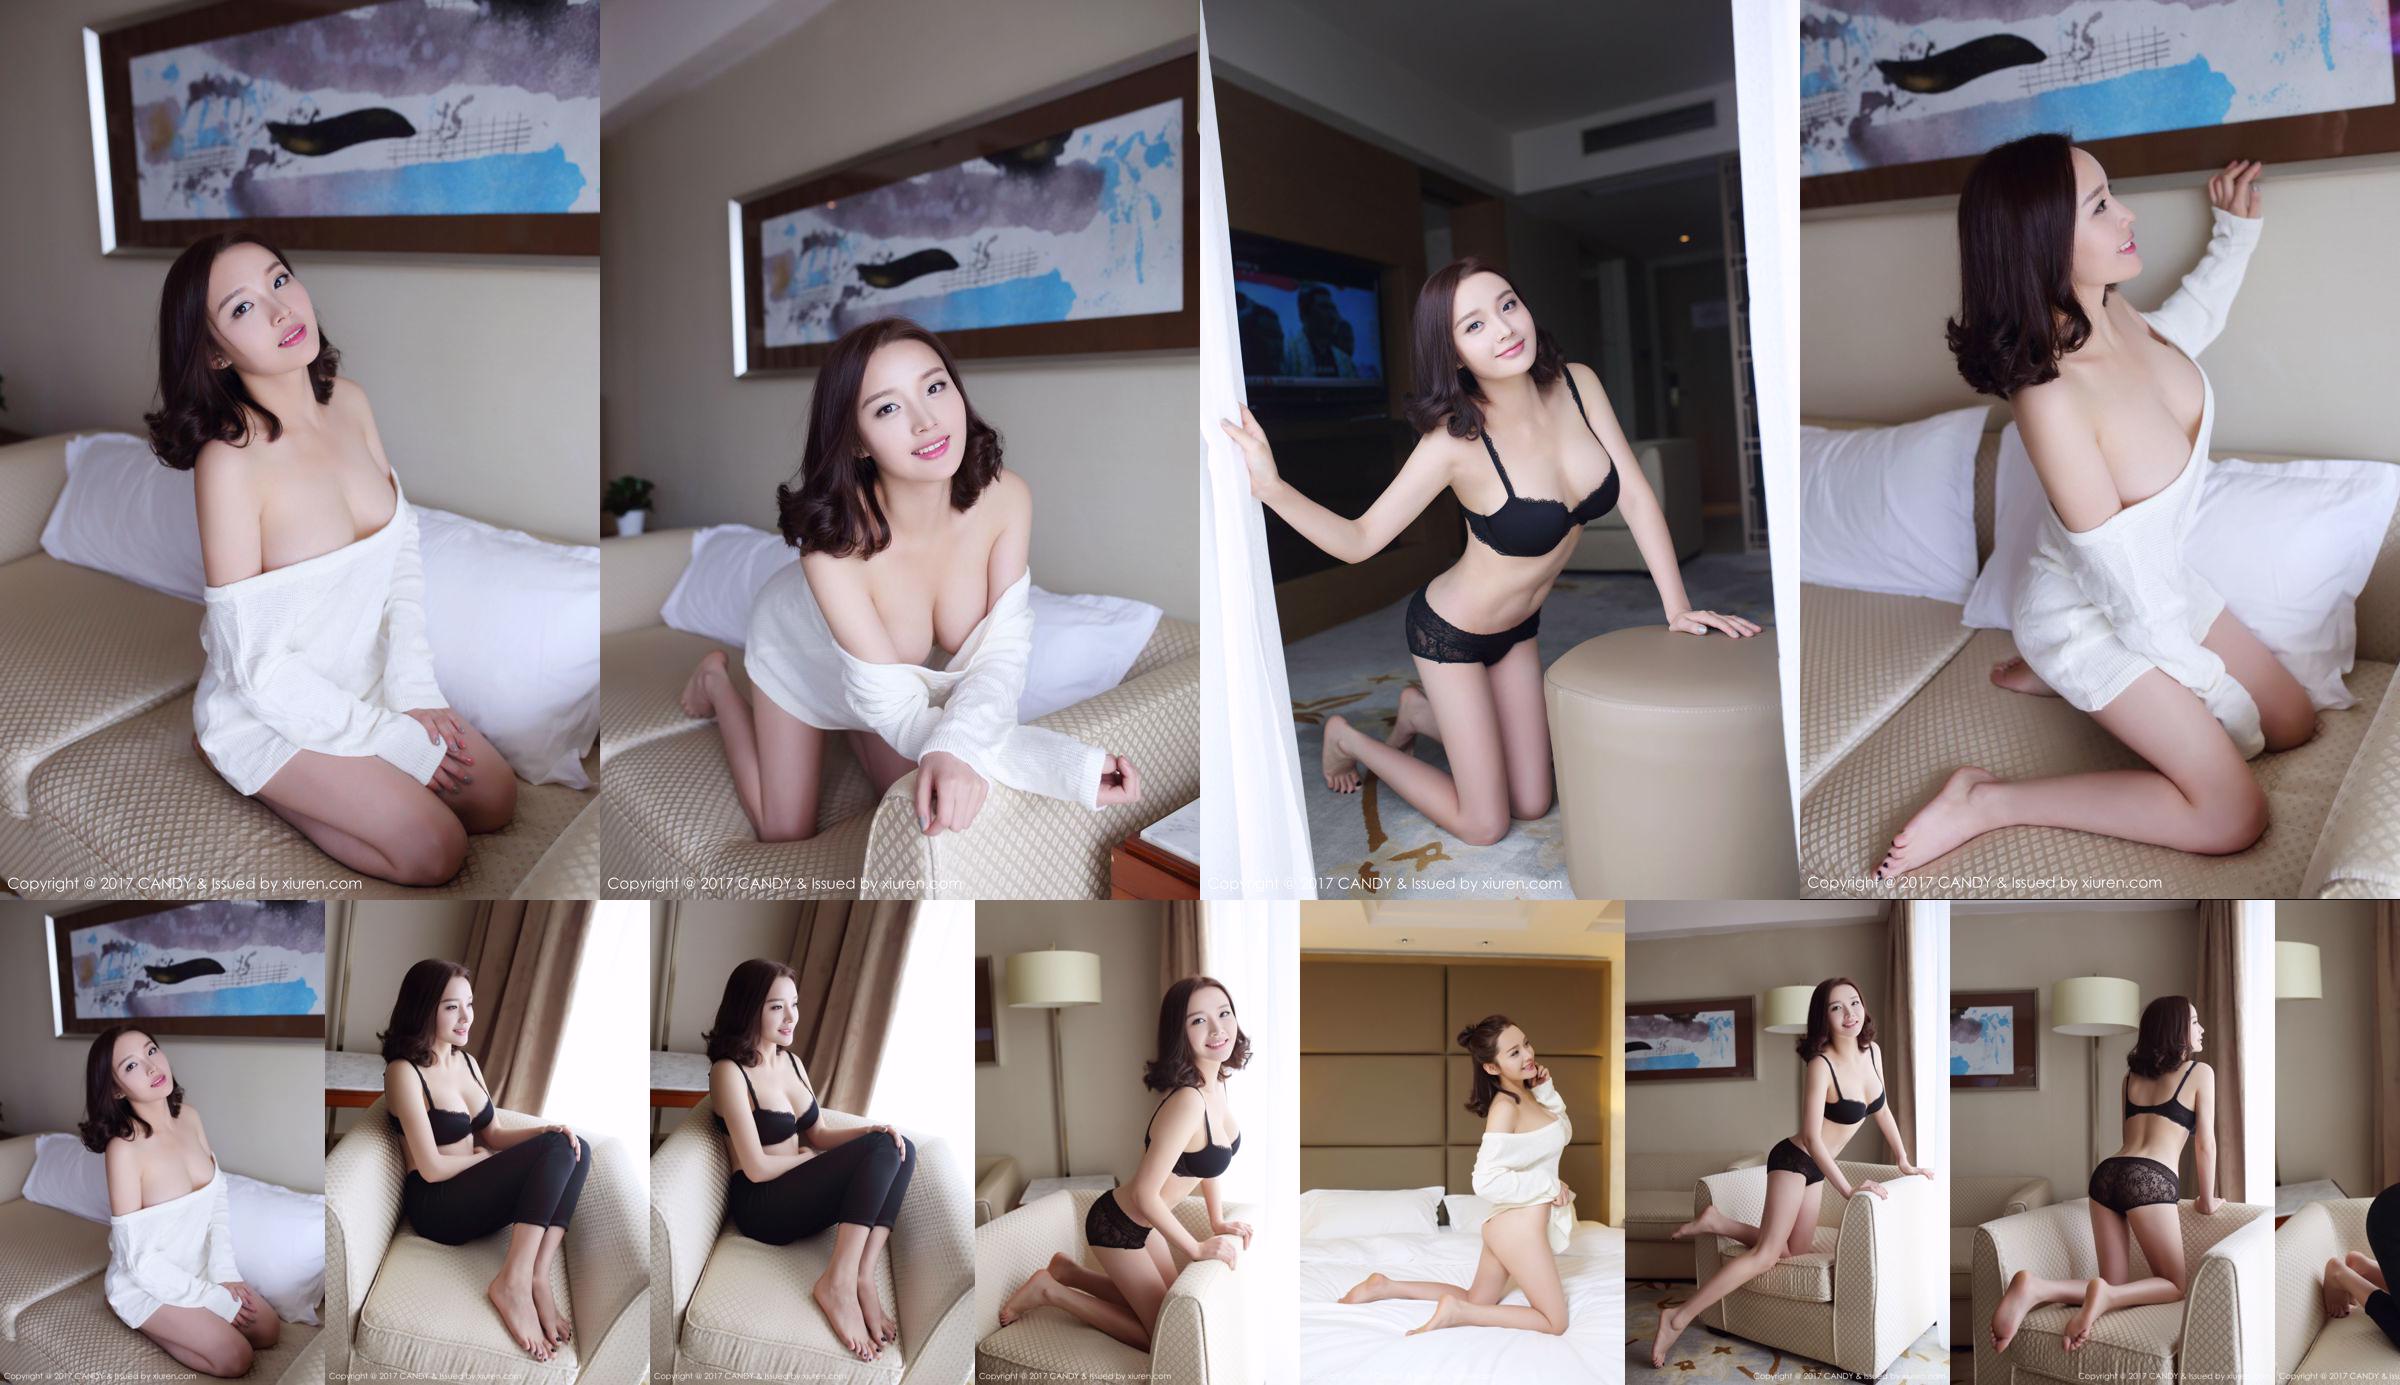 Wang Shiqi "The Beautiful Girl Next Door" [Candy Pictorial CANDY] Vol.033 No.f305bc Page 13